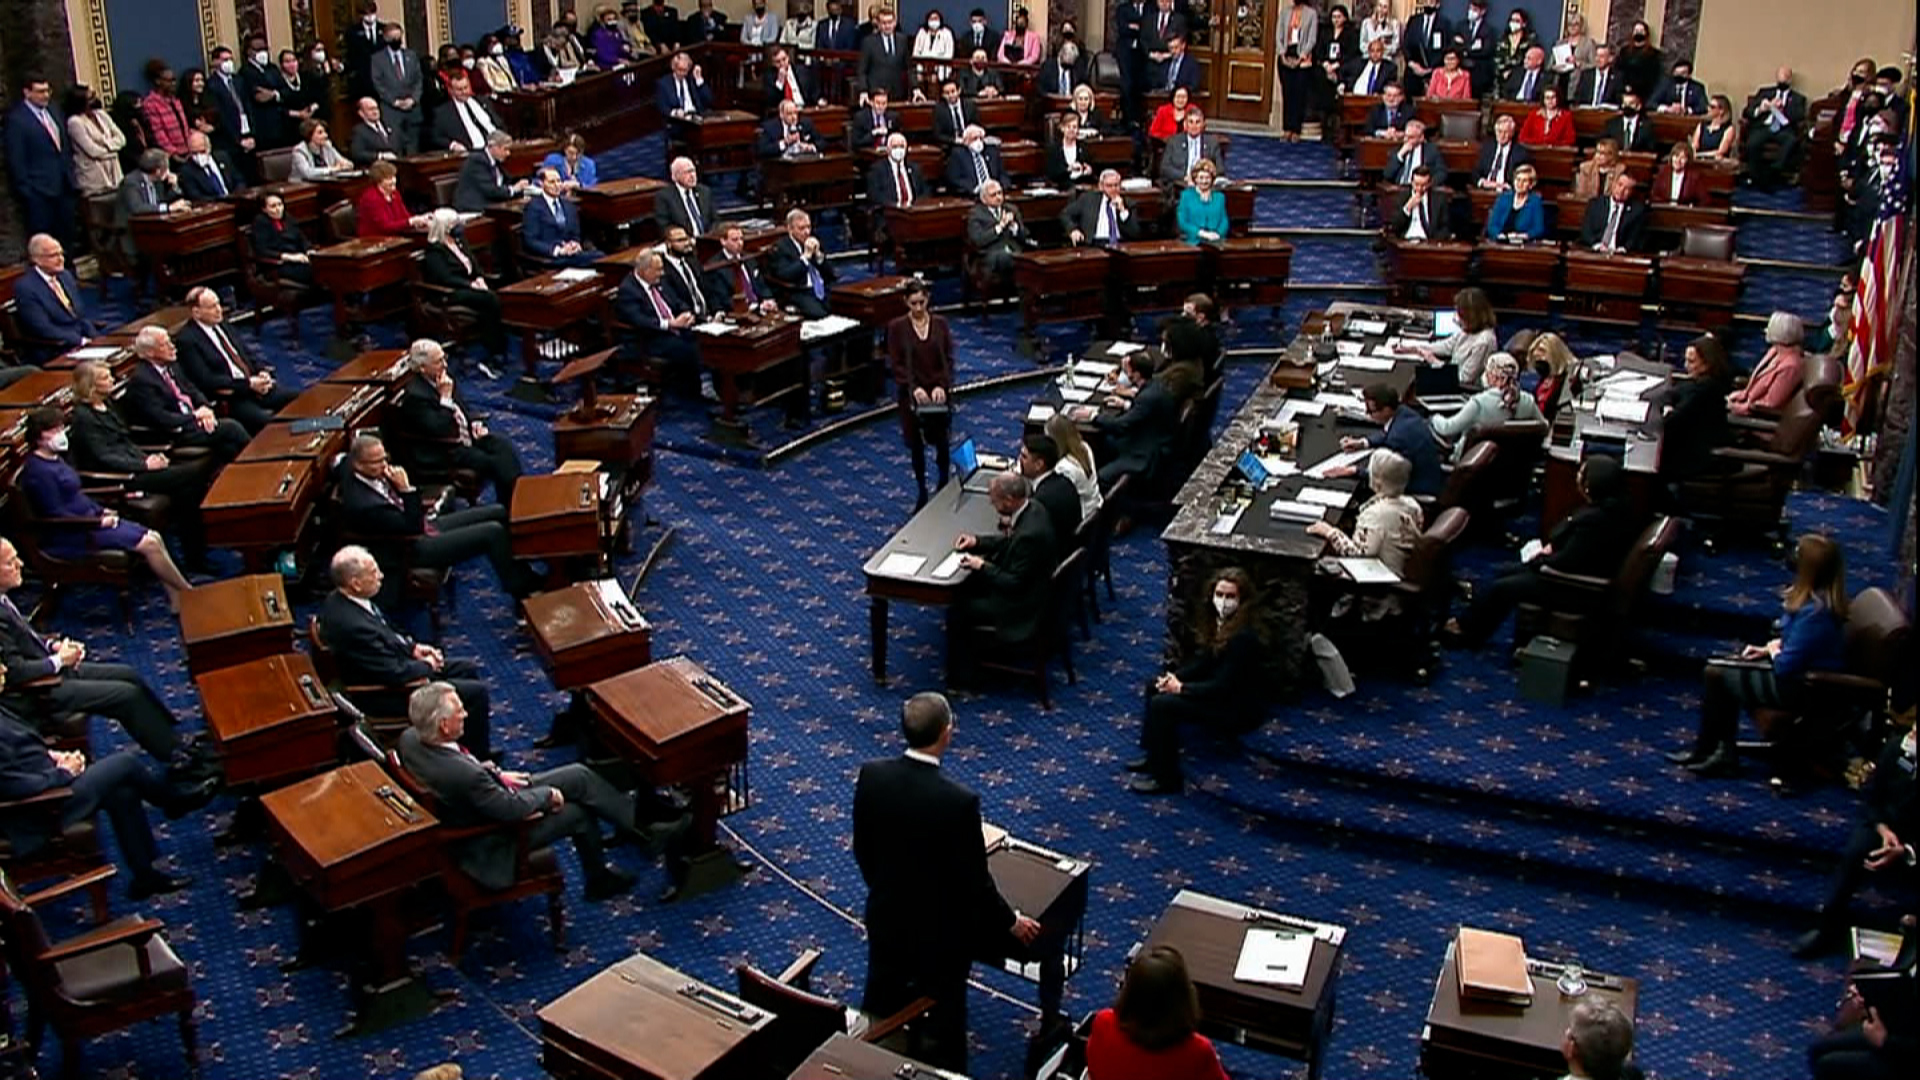 A view of the Senate floor during the final vote to confirm nominee Judge Ketanji Brown Jackson to the Supreme Court. 